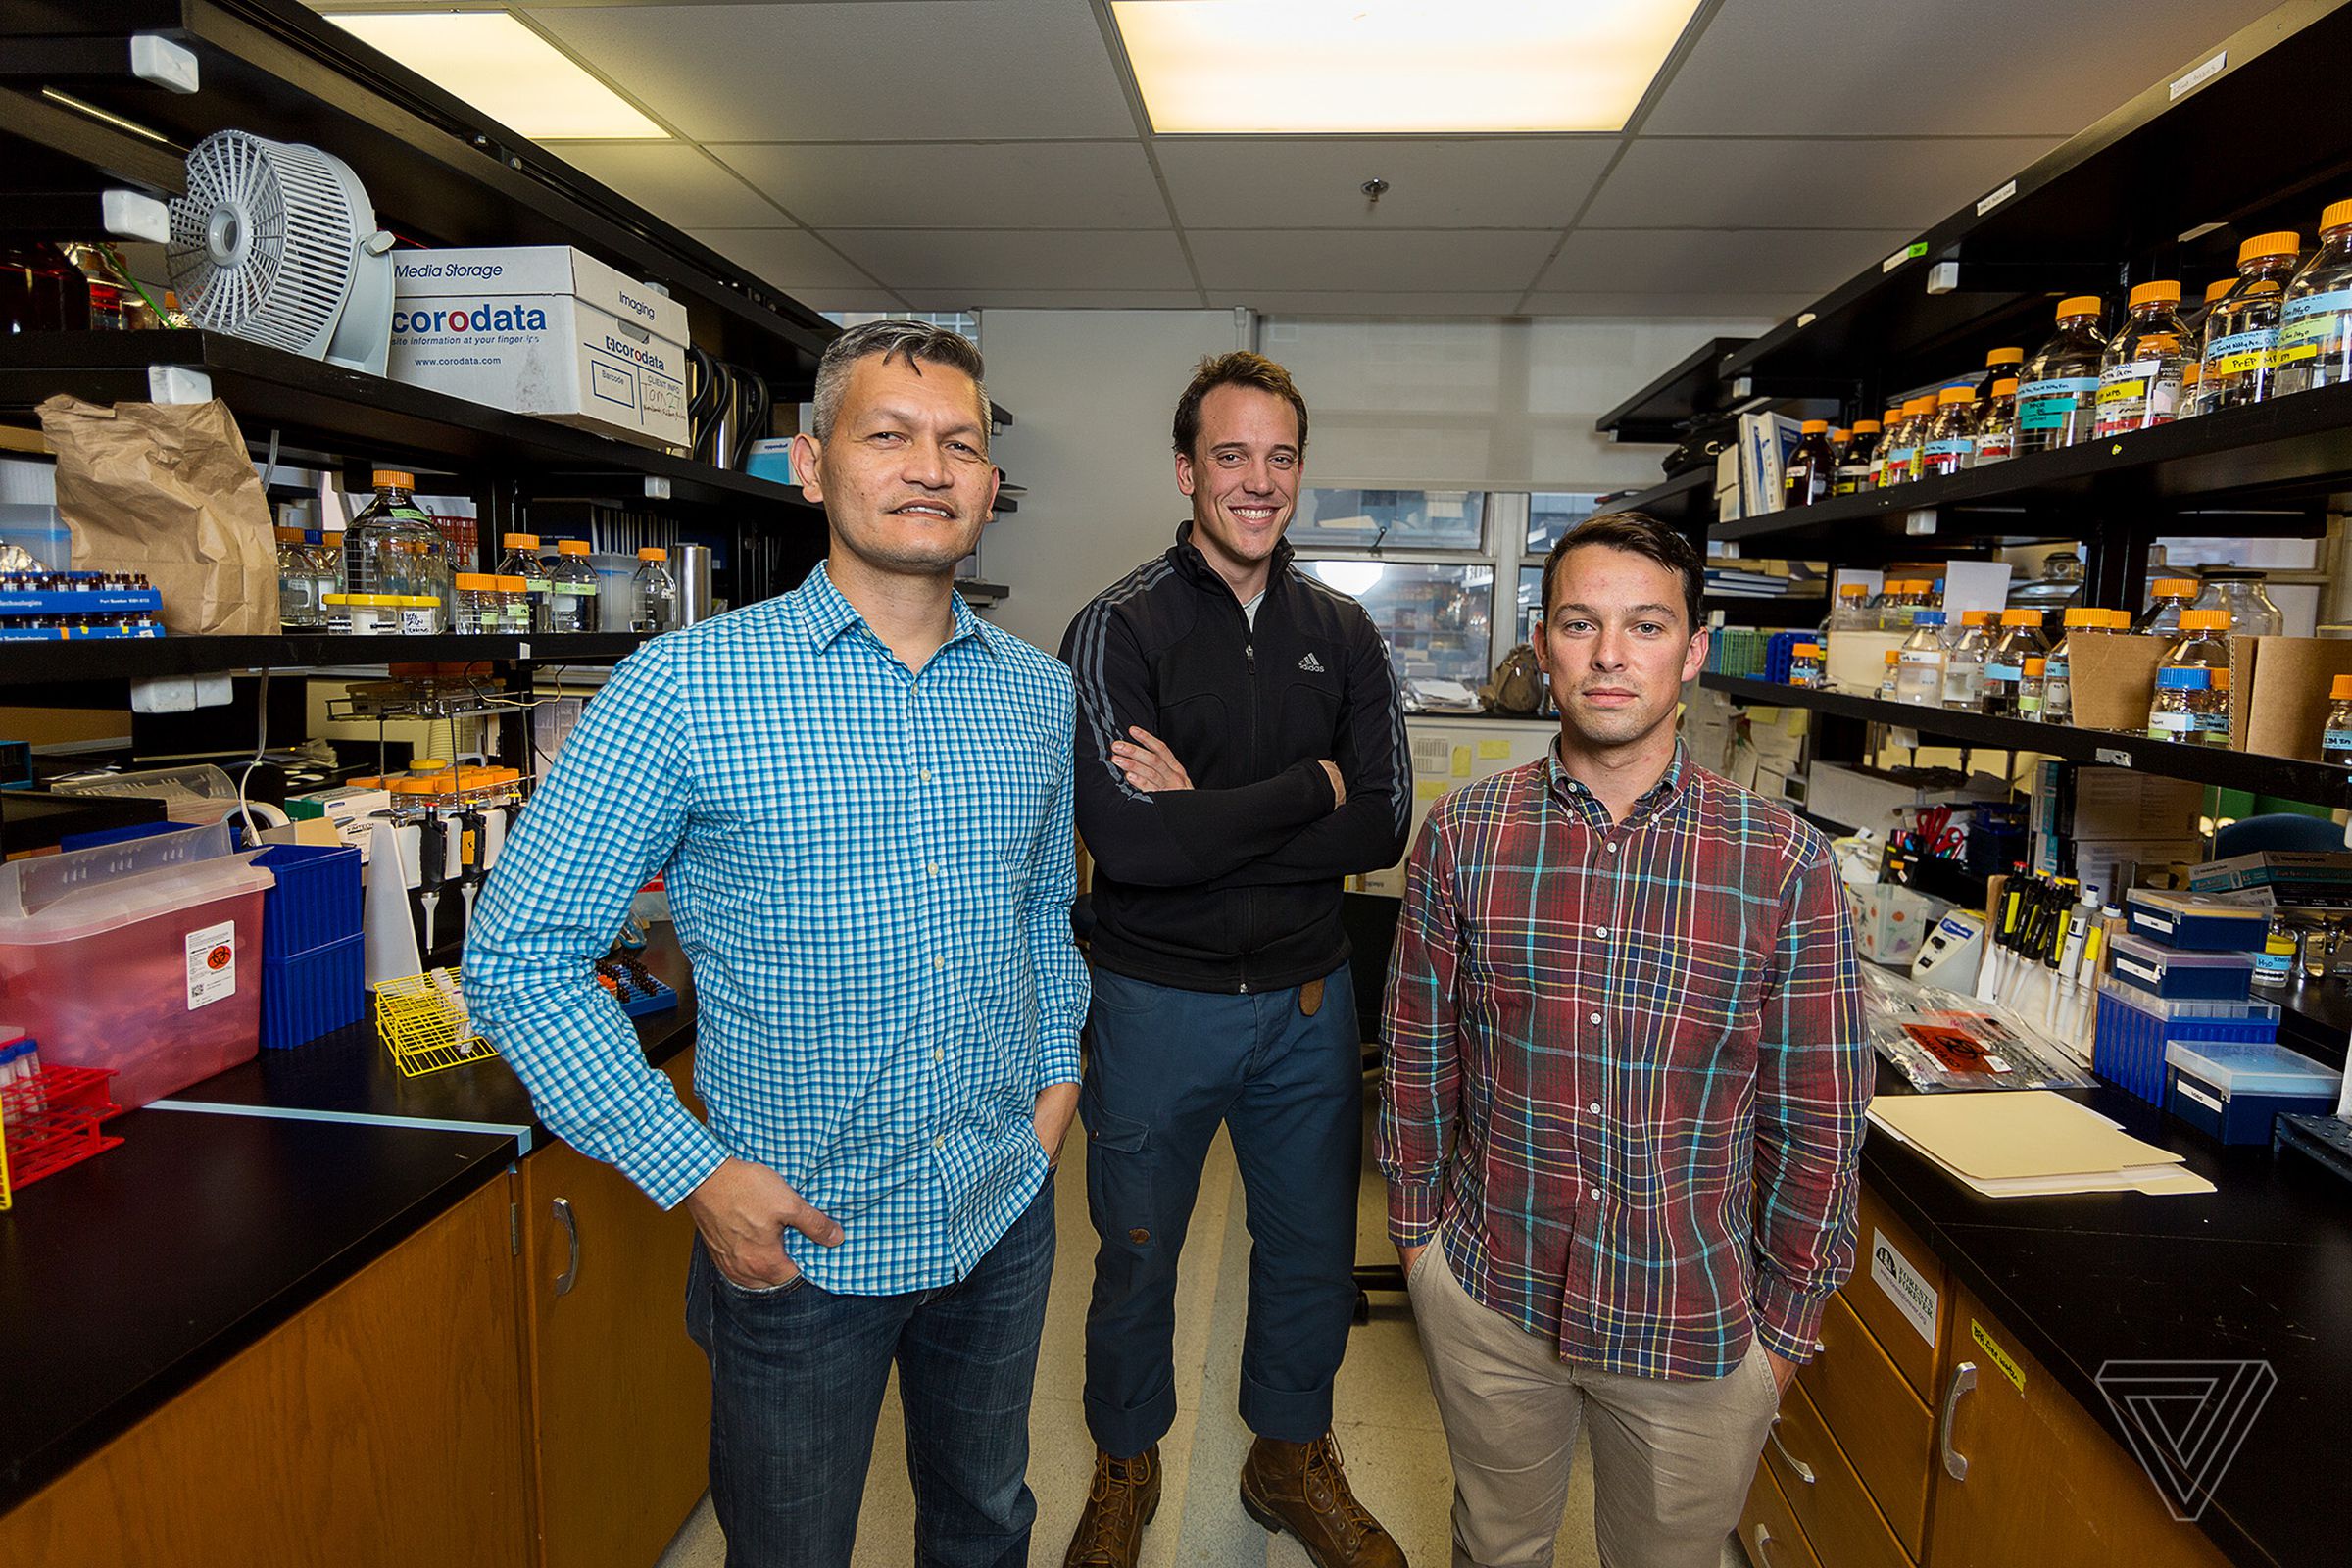 From left: toxicologist Roy Gerona, graduate student Axel Adams, and chemist Samuel Banister. These are key members of the team that works on identifying synthetic drugs.